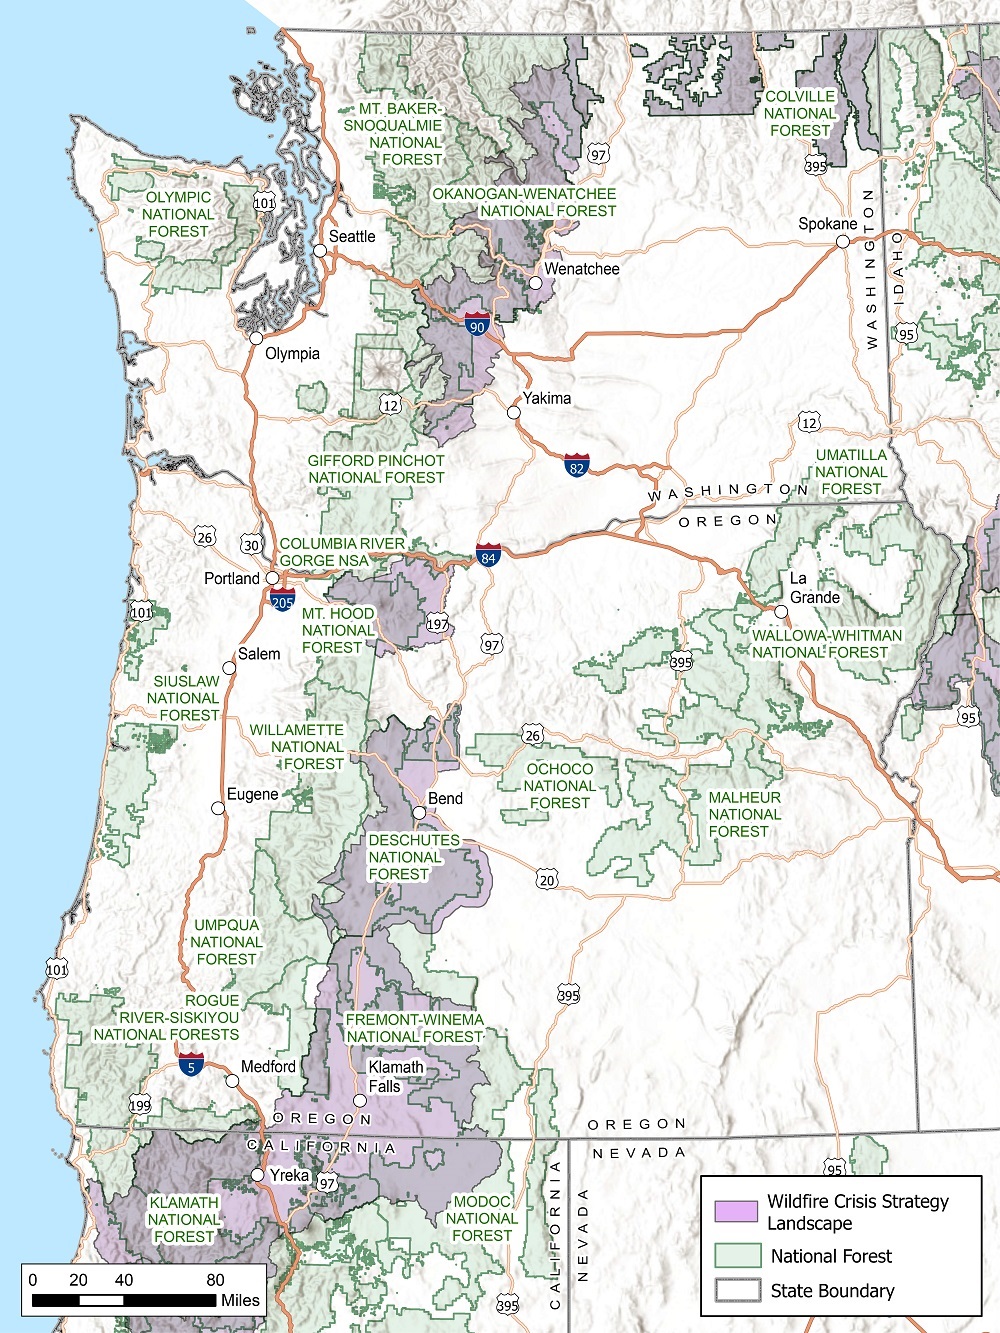 A map of Washington and Oregon, with five wildfire crisis investment landscapes highlighted